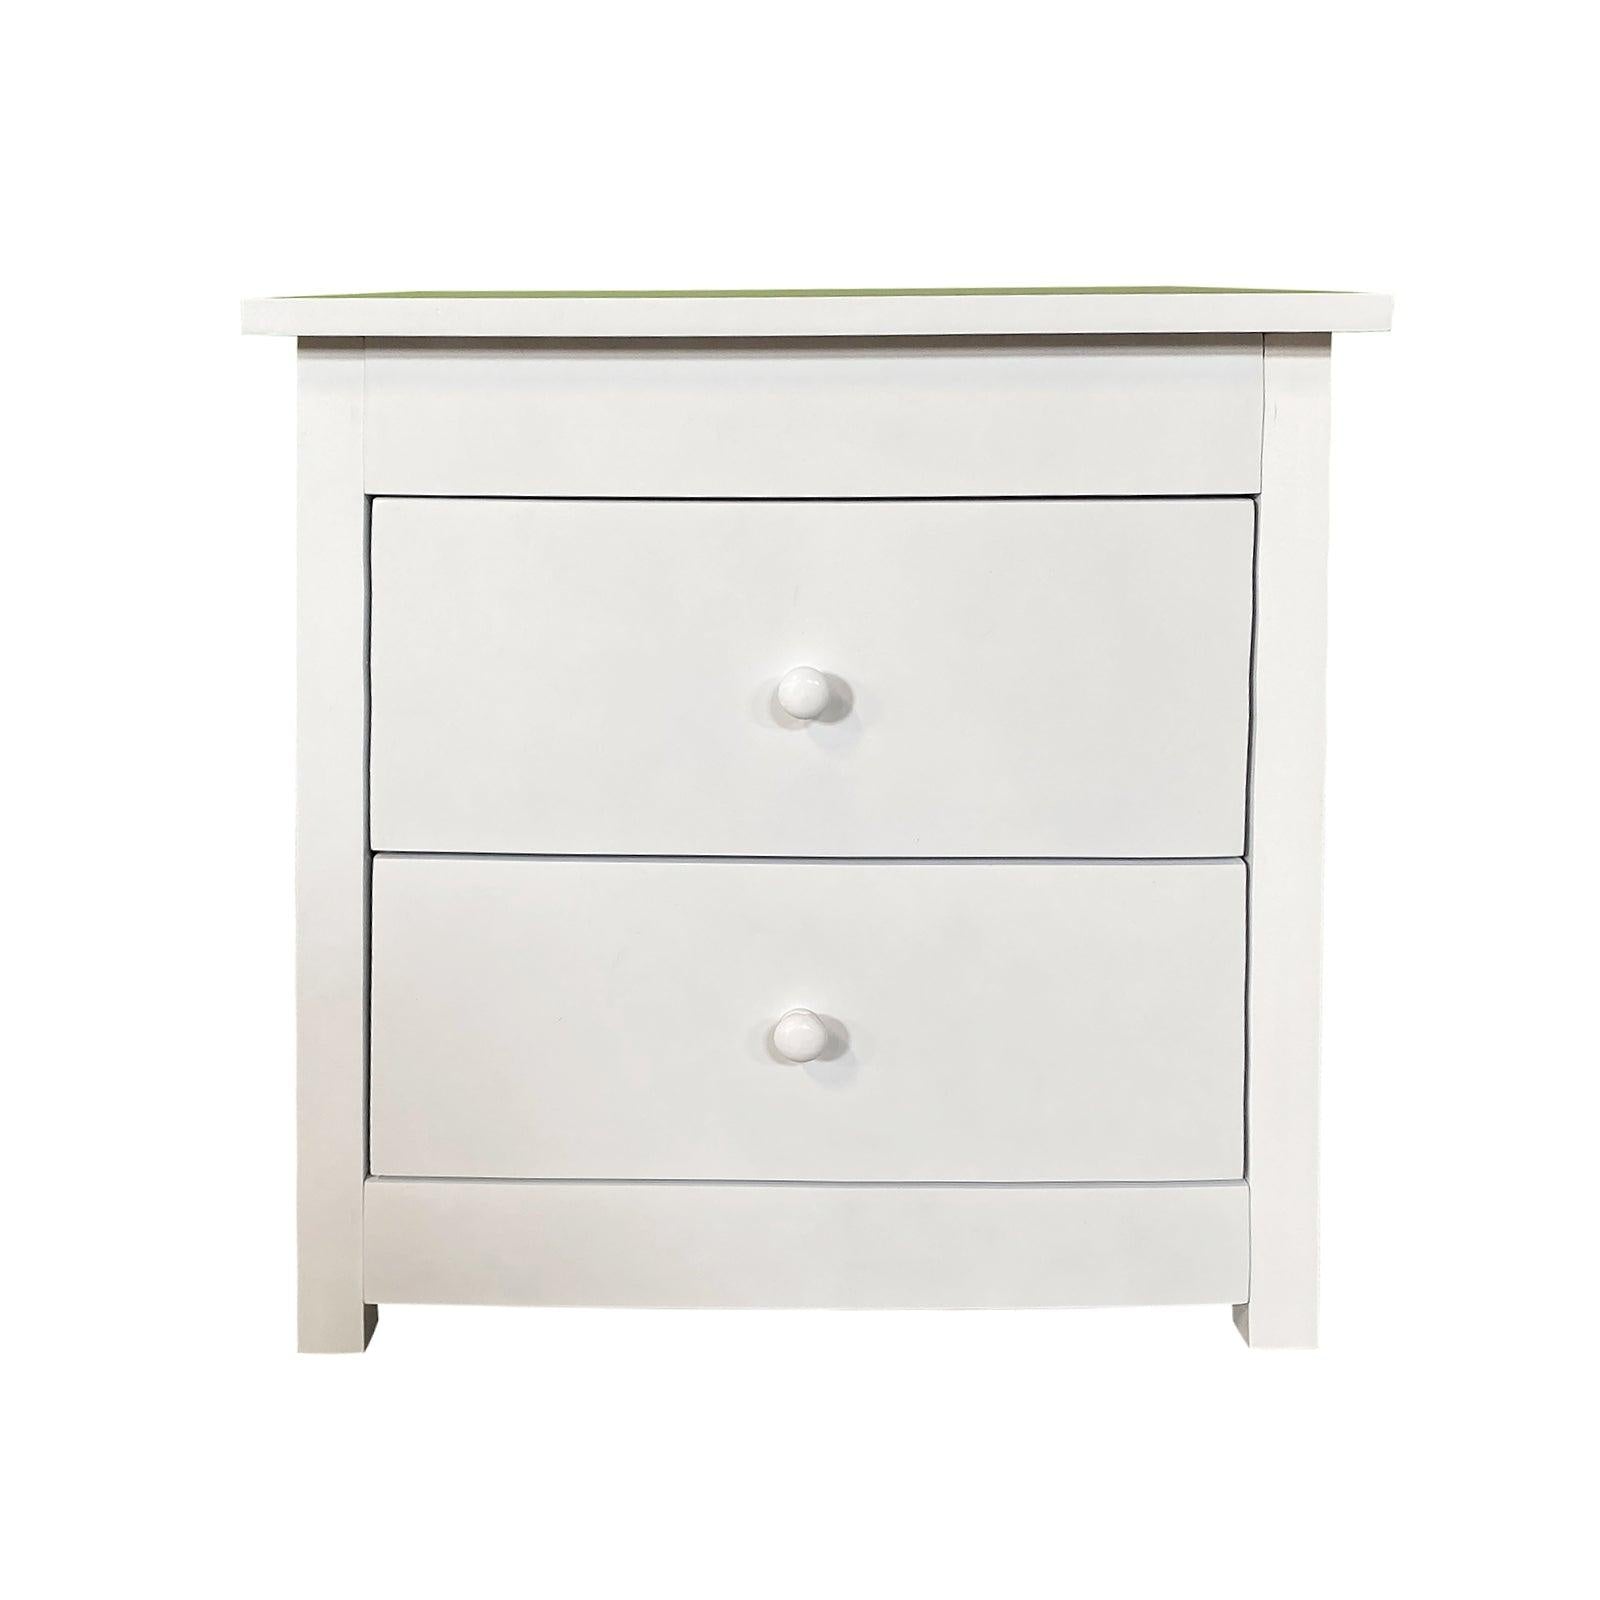 Milano Decor Bedside Table Byron Bay White Storage Cabinet Bedroom One Pack Deals499